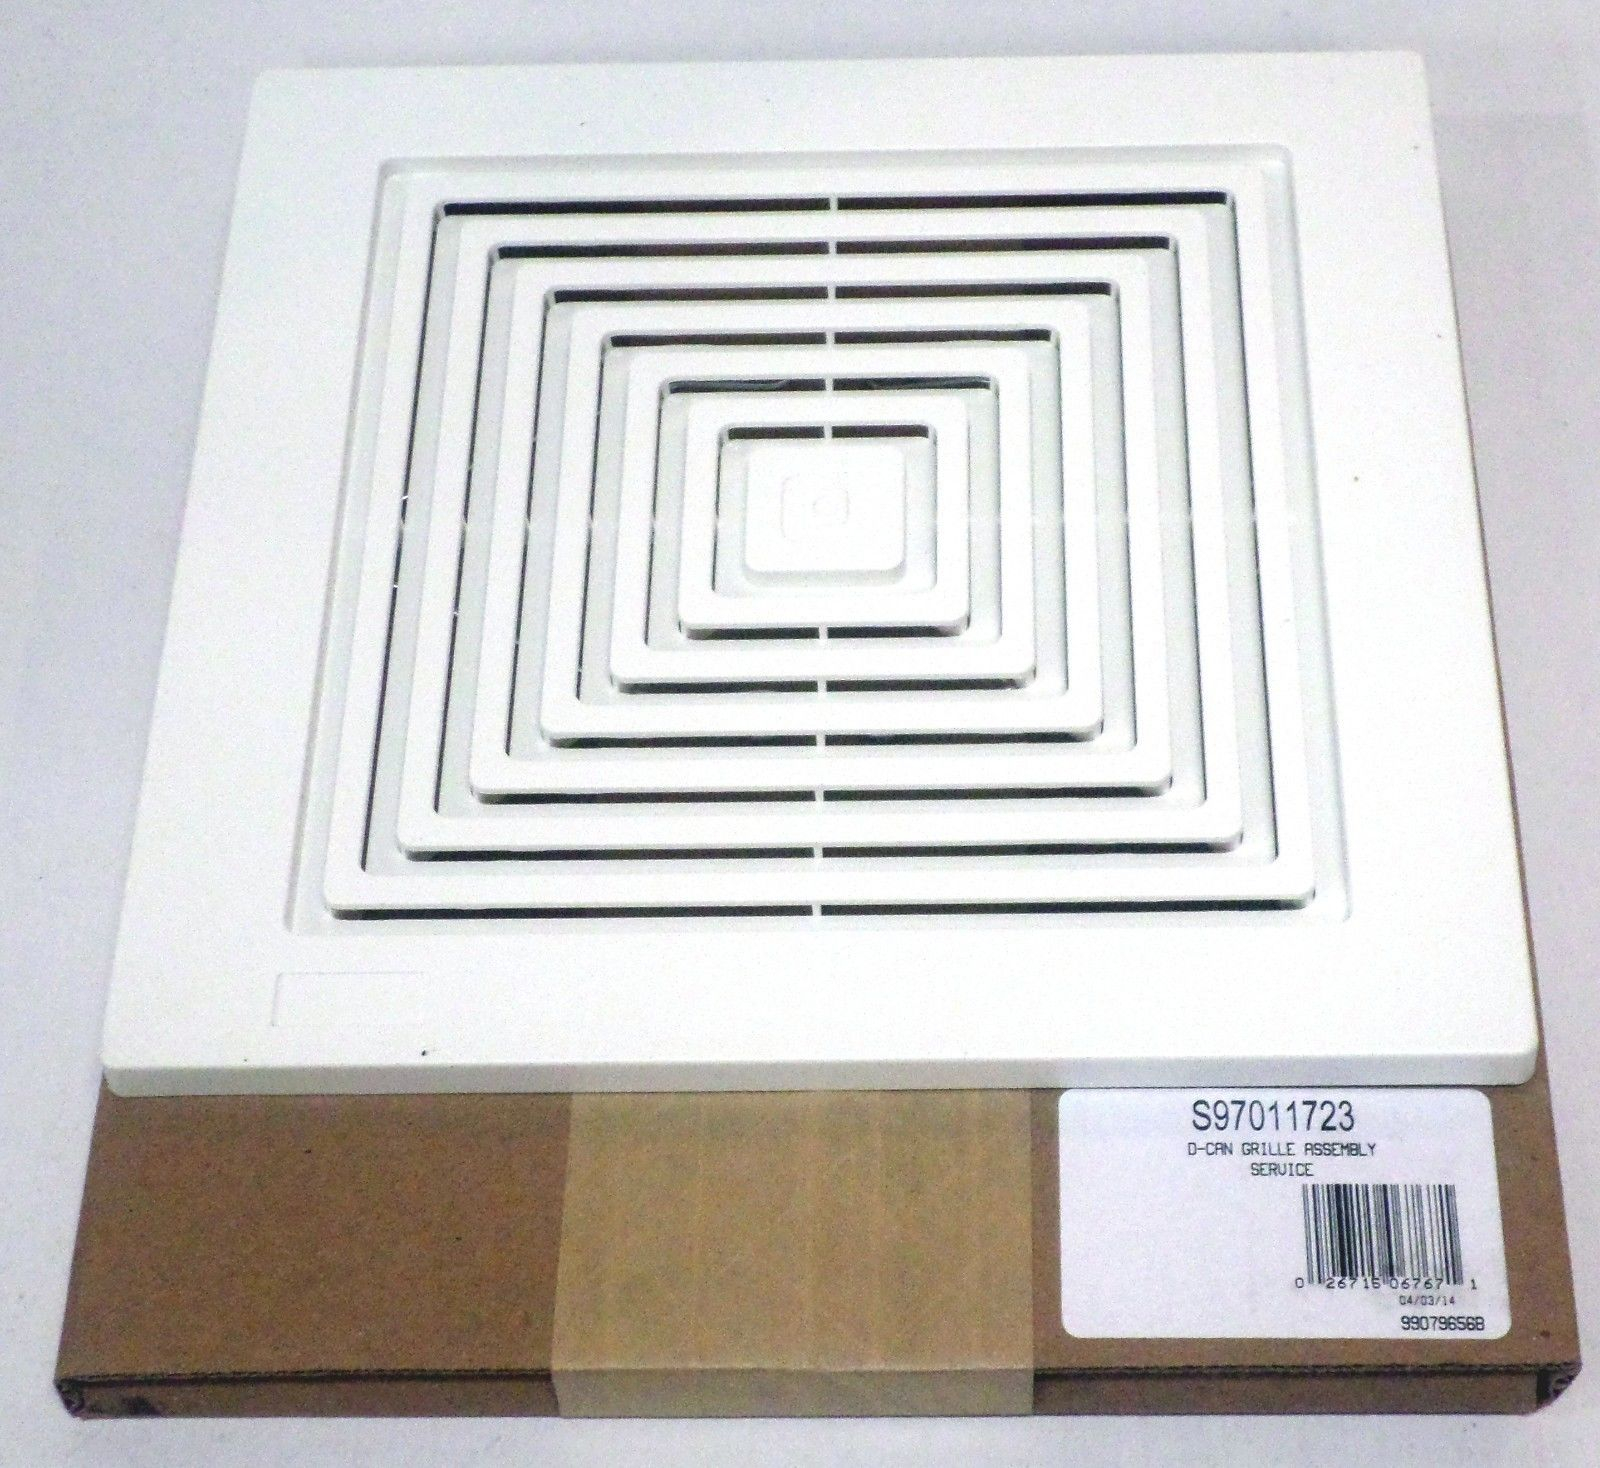 Dtails Broan Nutone 97011723 Bath Bathroom Ceiling Fan Grille Grill Cover Plastic White within proportions 1600 X 1468